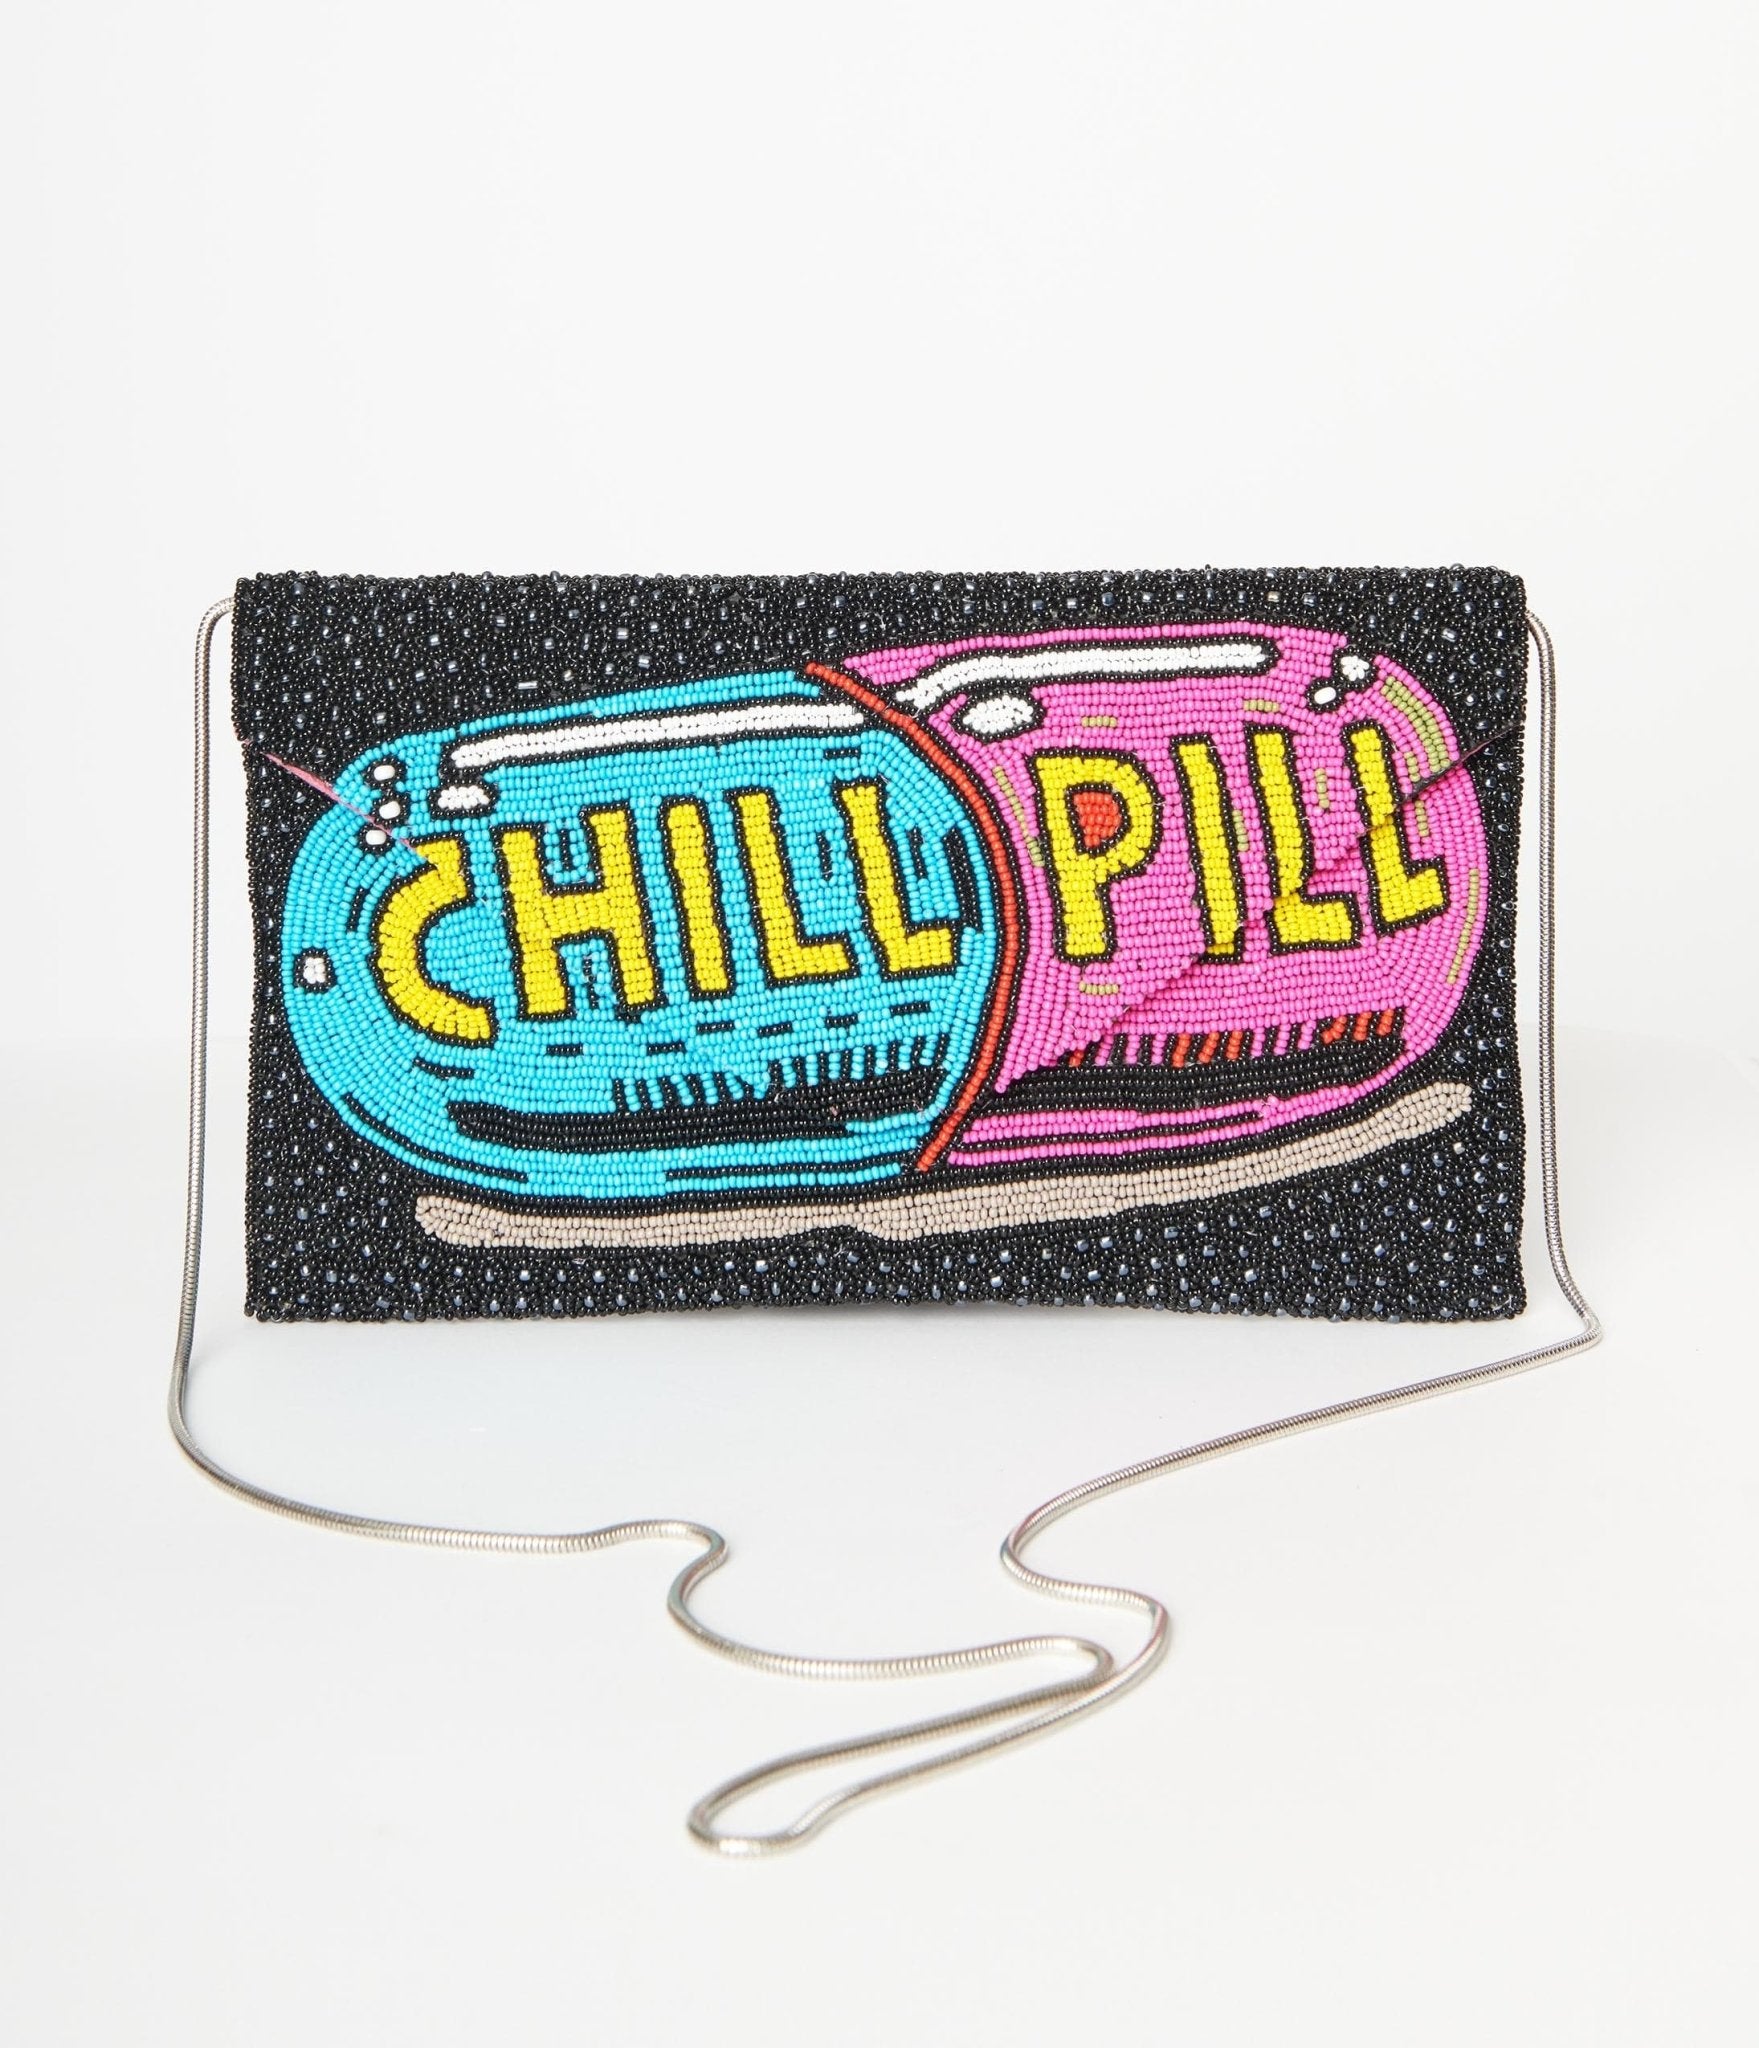 Chill Pill Beaded Clutch - Unique Vintage - Womens, ACCESSORIES, HANDBAGS